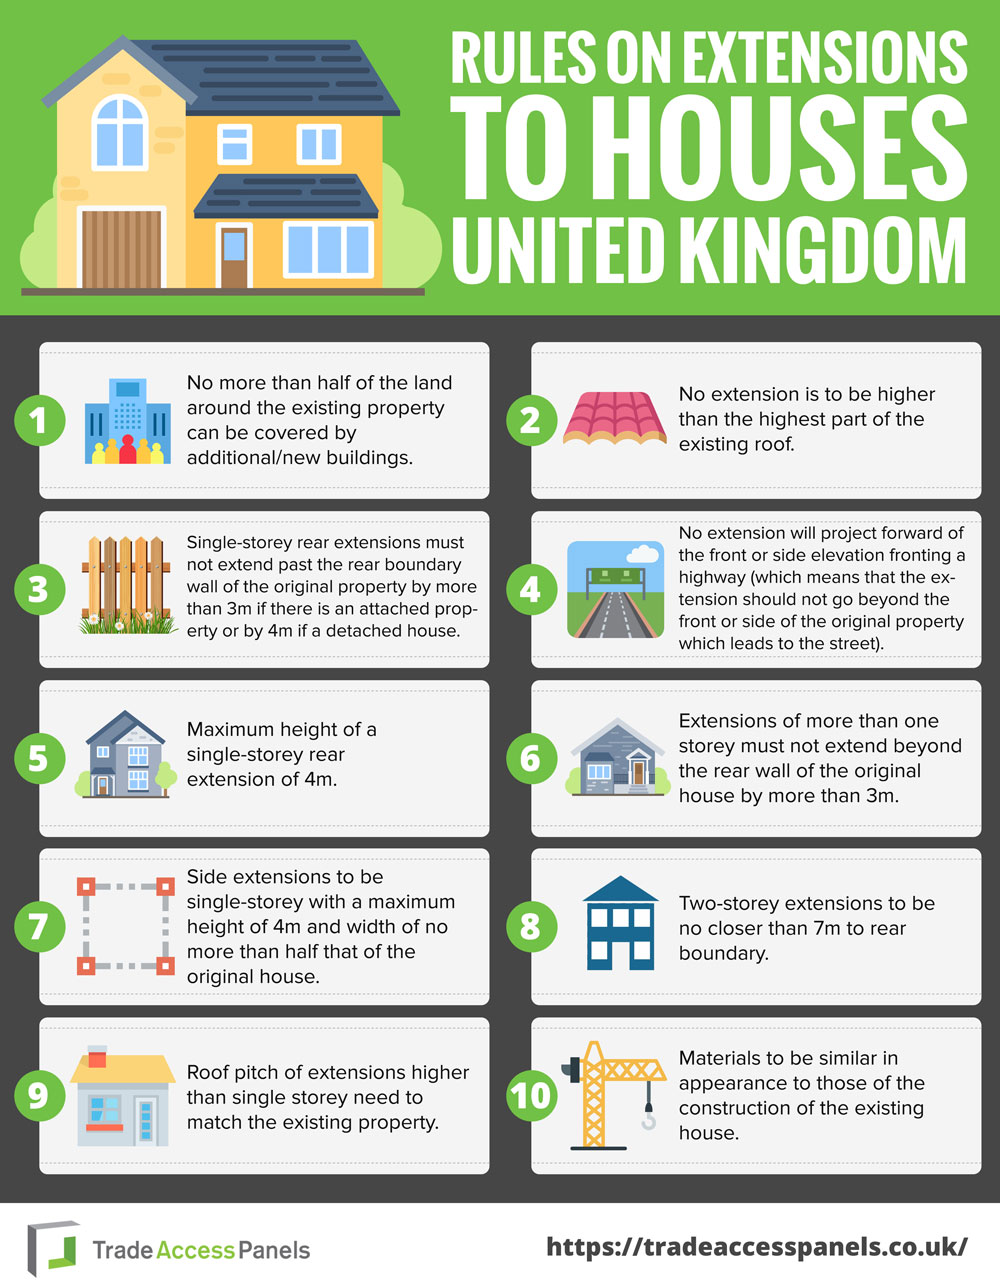 House Extension Rules in the United Kingdom